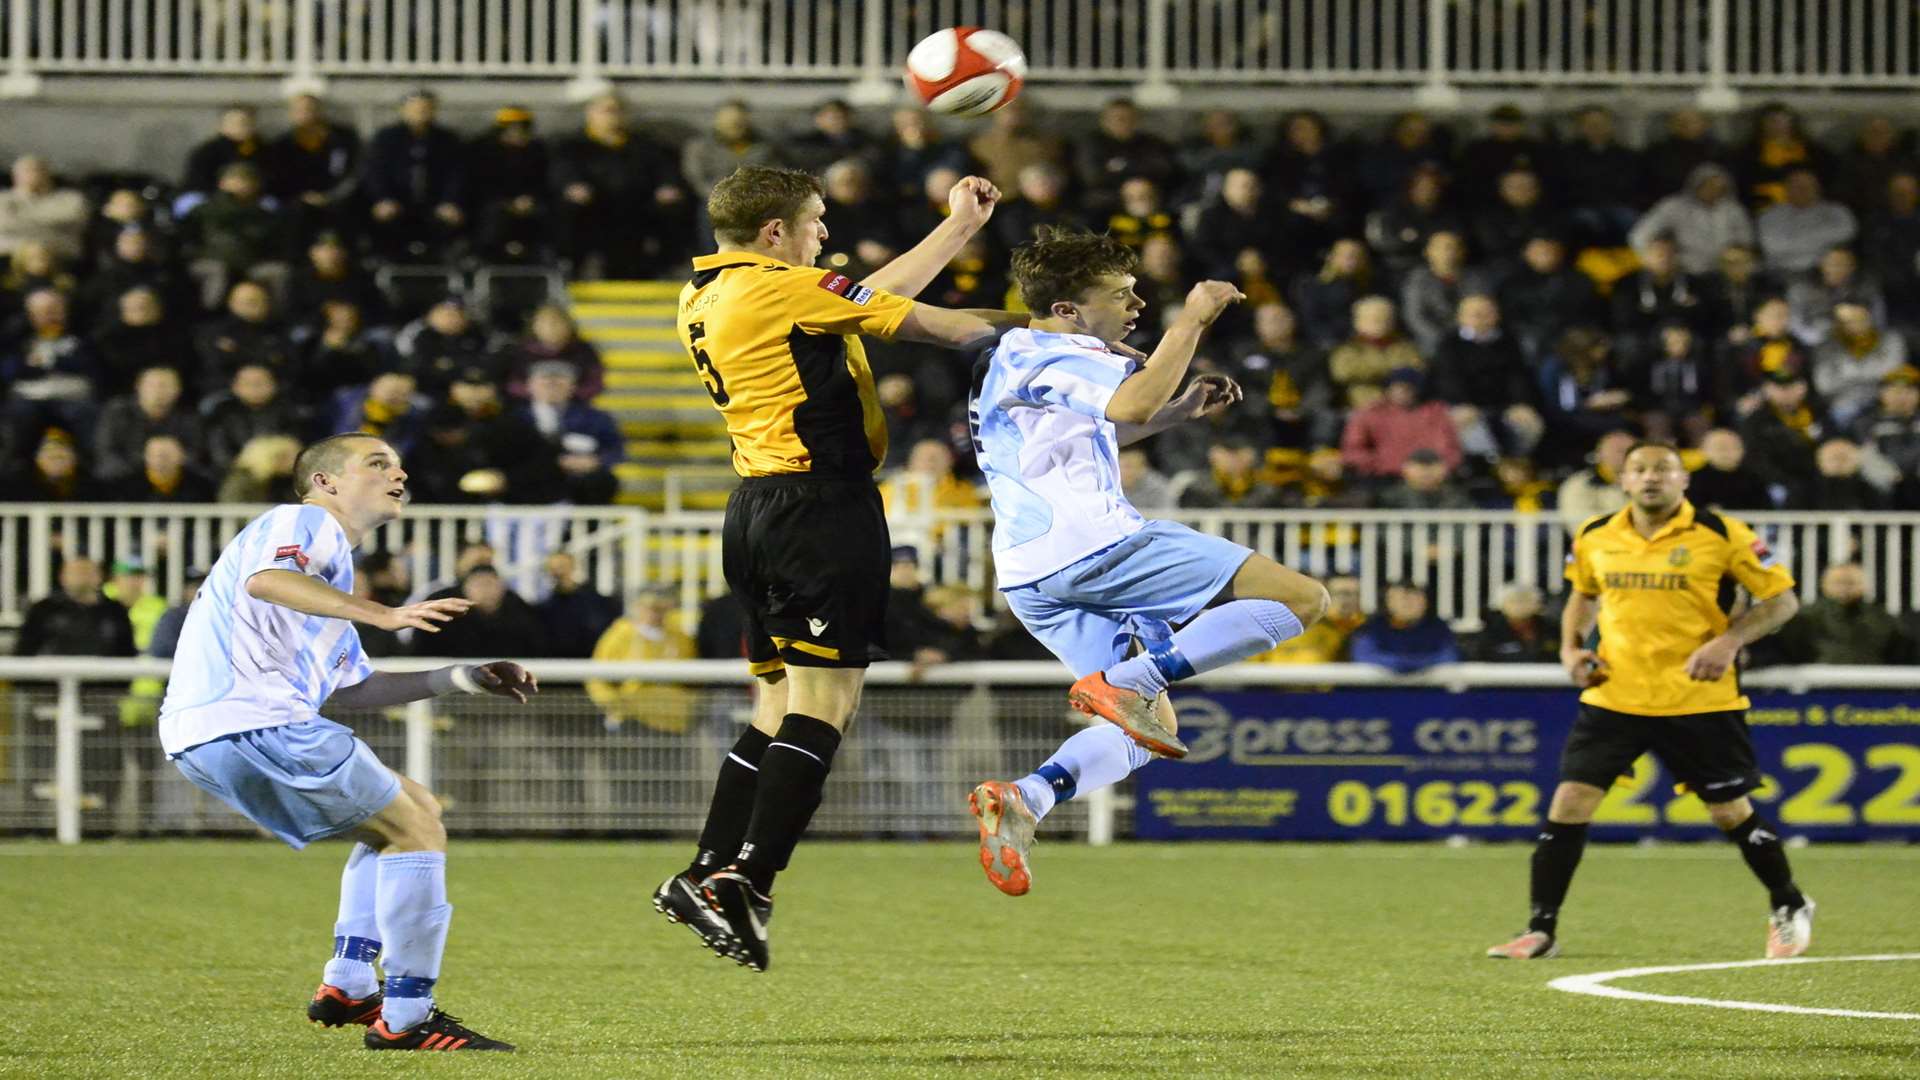 Johan ter Horst gets airborne during Folkestone's play-off defeat at Maidstone in April 2013 Picture: Martin Apps